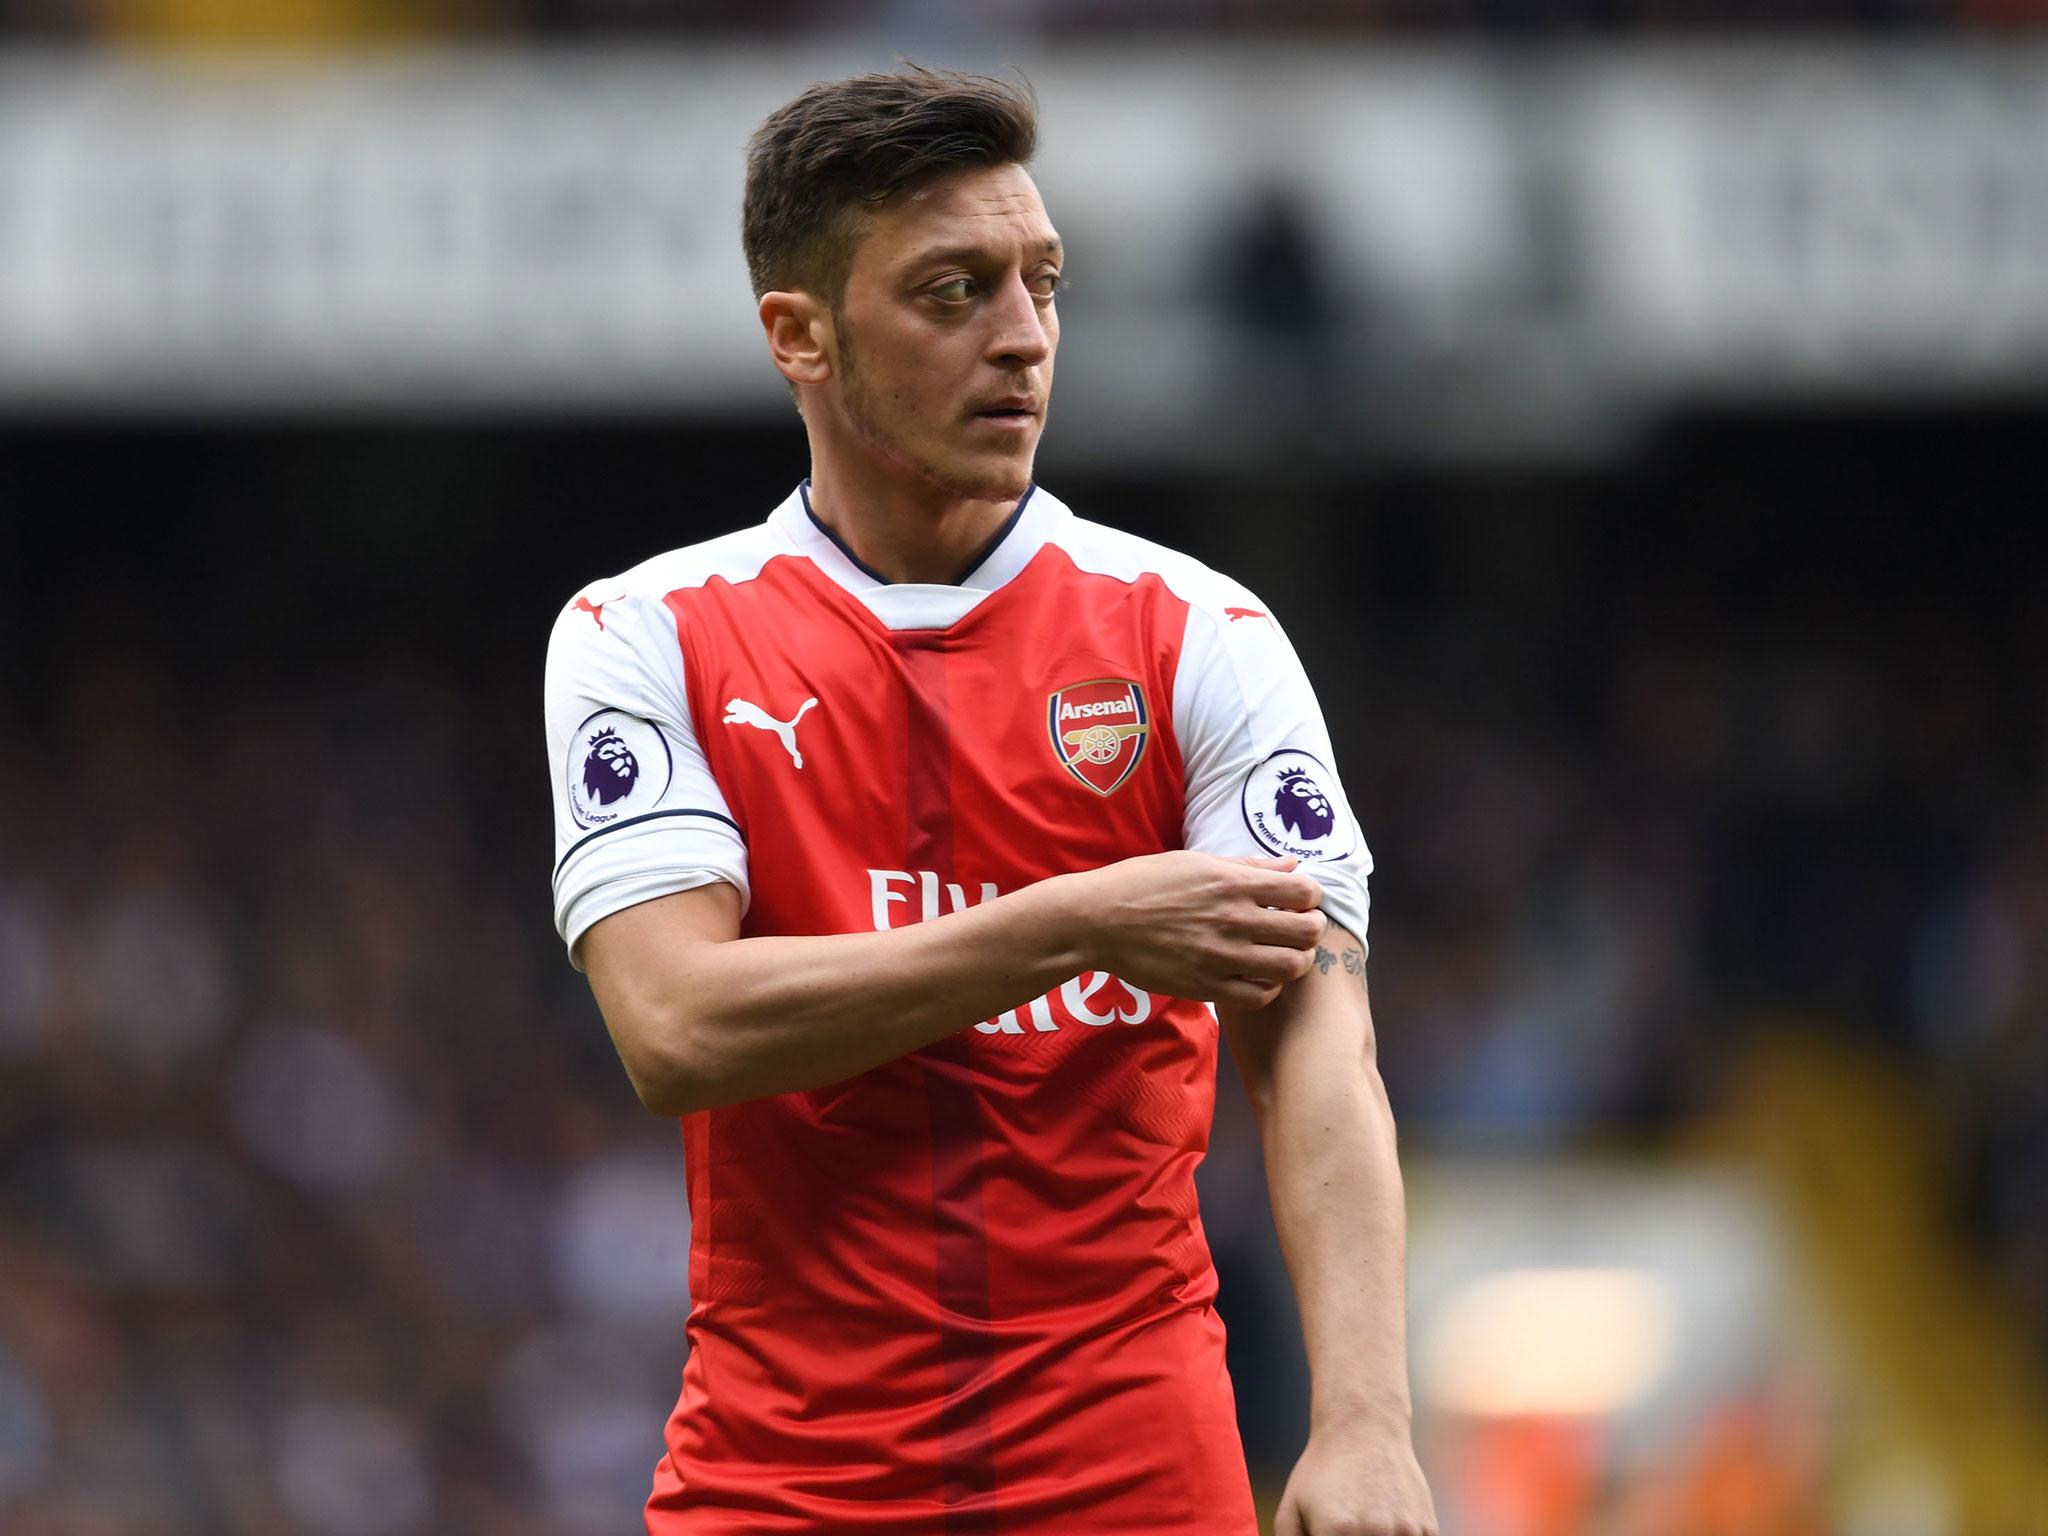 Arsene Wenger will have words with Mesut Özil about his angry reaction after the north London derby